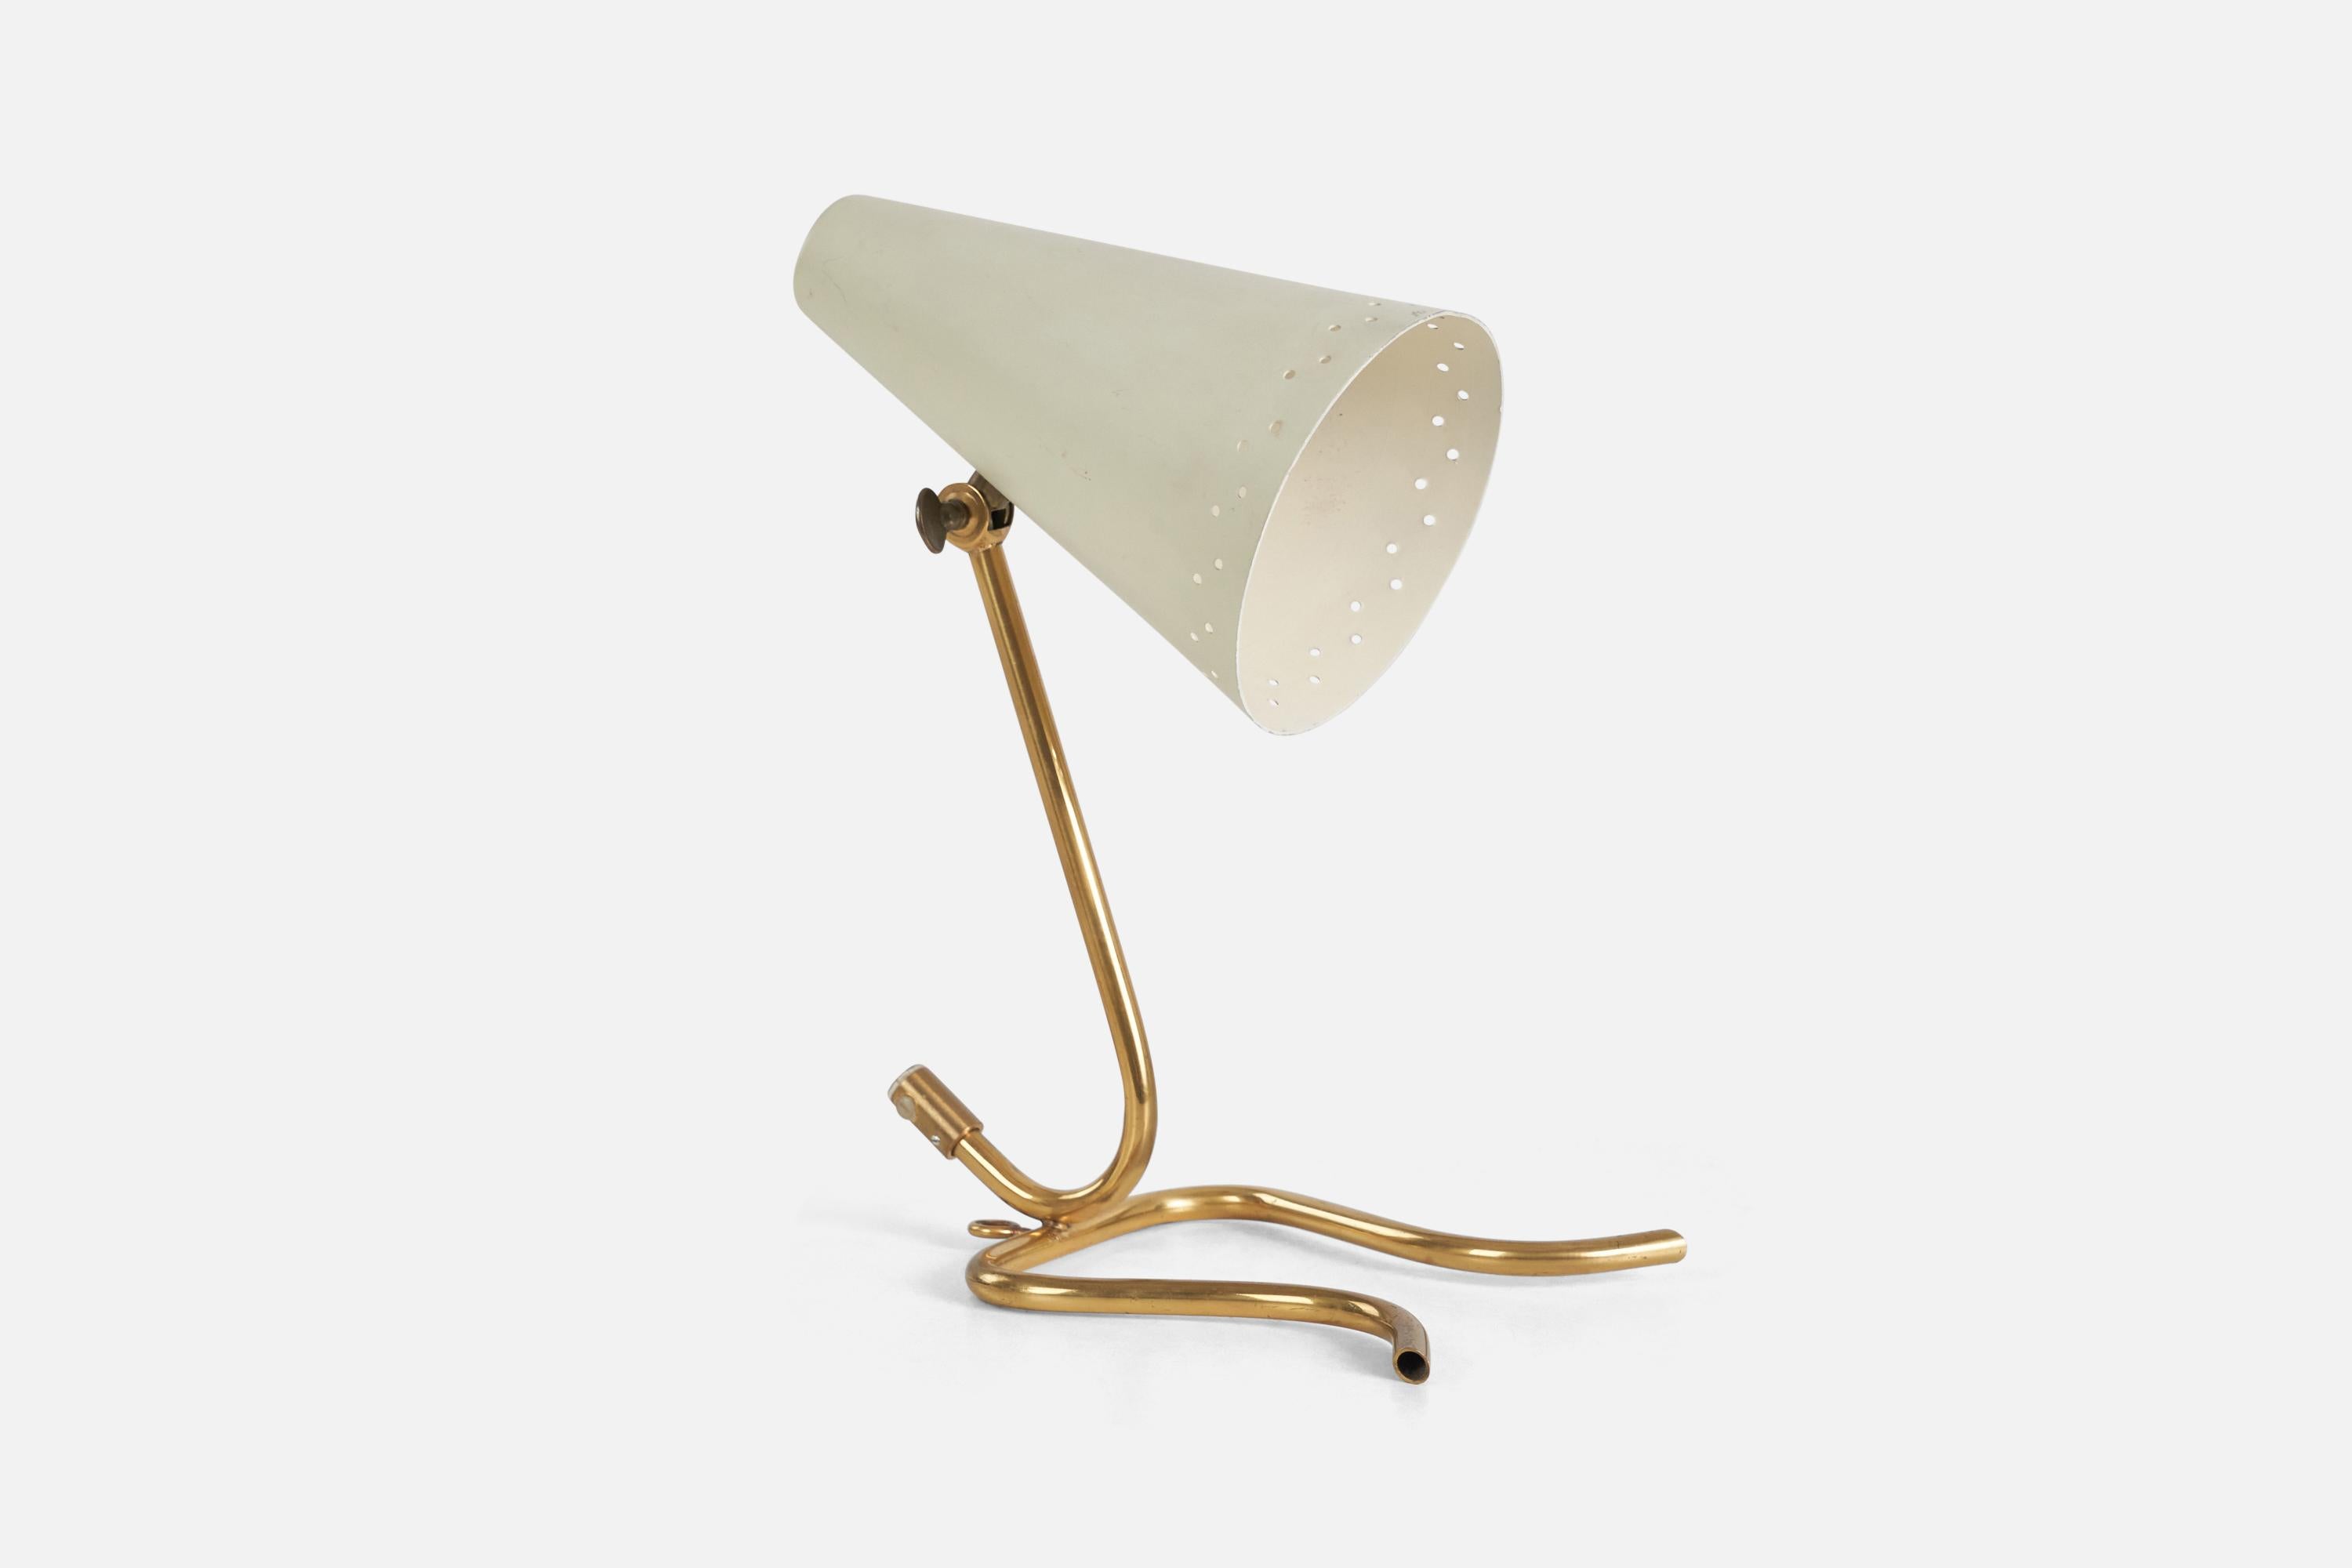 A brass and white-lacquered metal table lamp designed and produced in Sweden, c. 1950s. 

Dimensions variable, measured as illustrated in first image.

Socket takes standard E-26 medium base bulb.

There is no maximum wattage stated on the